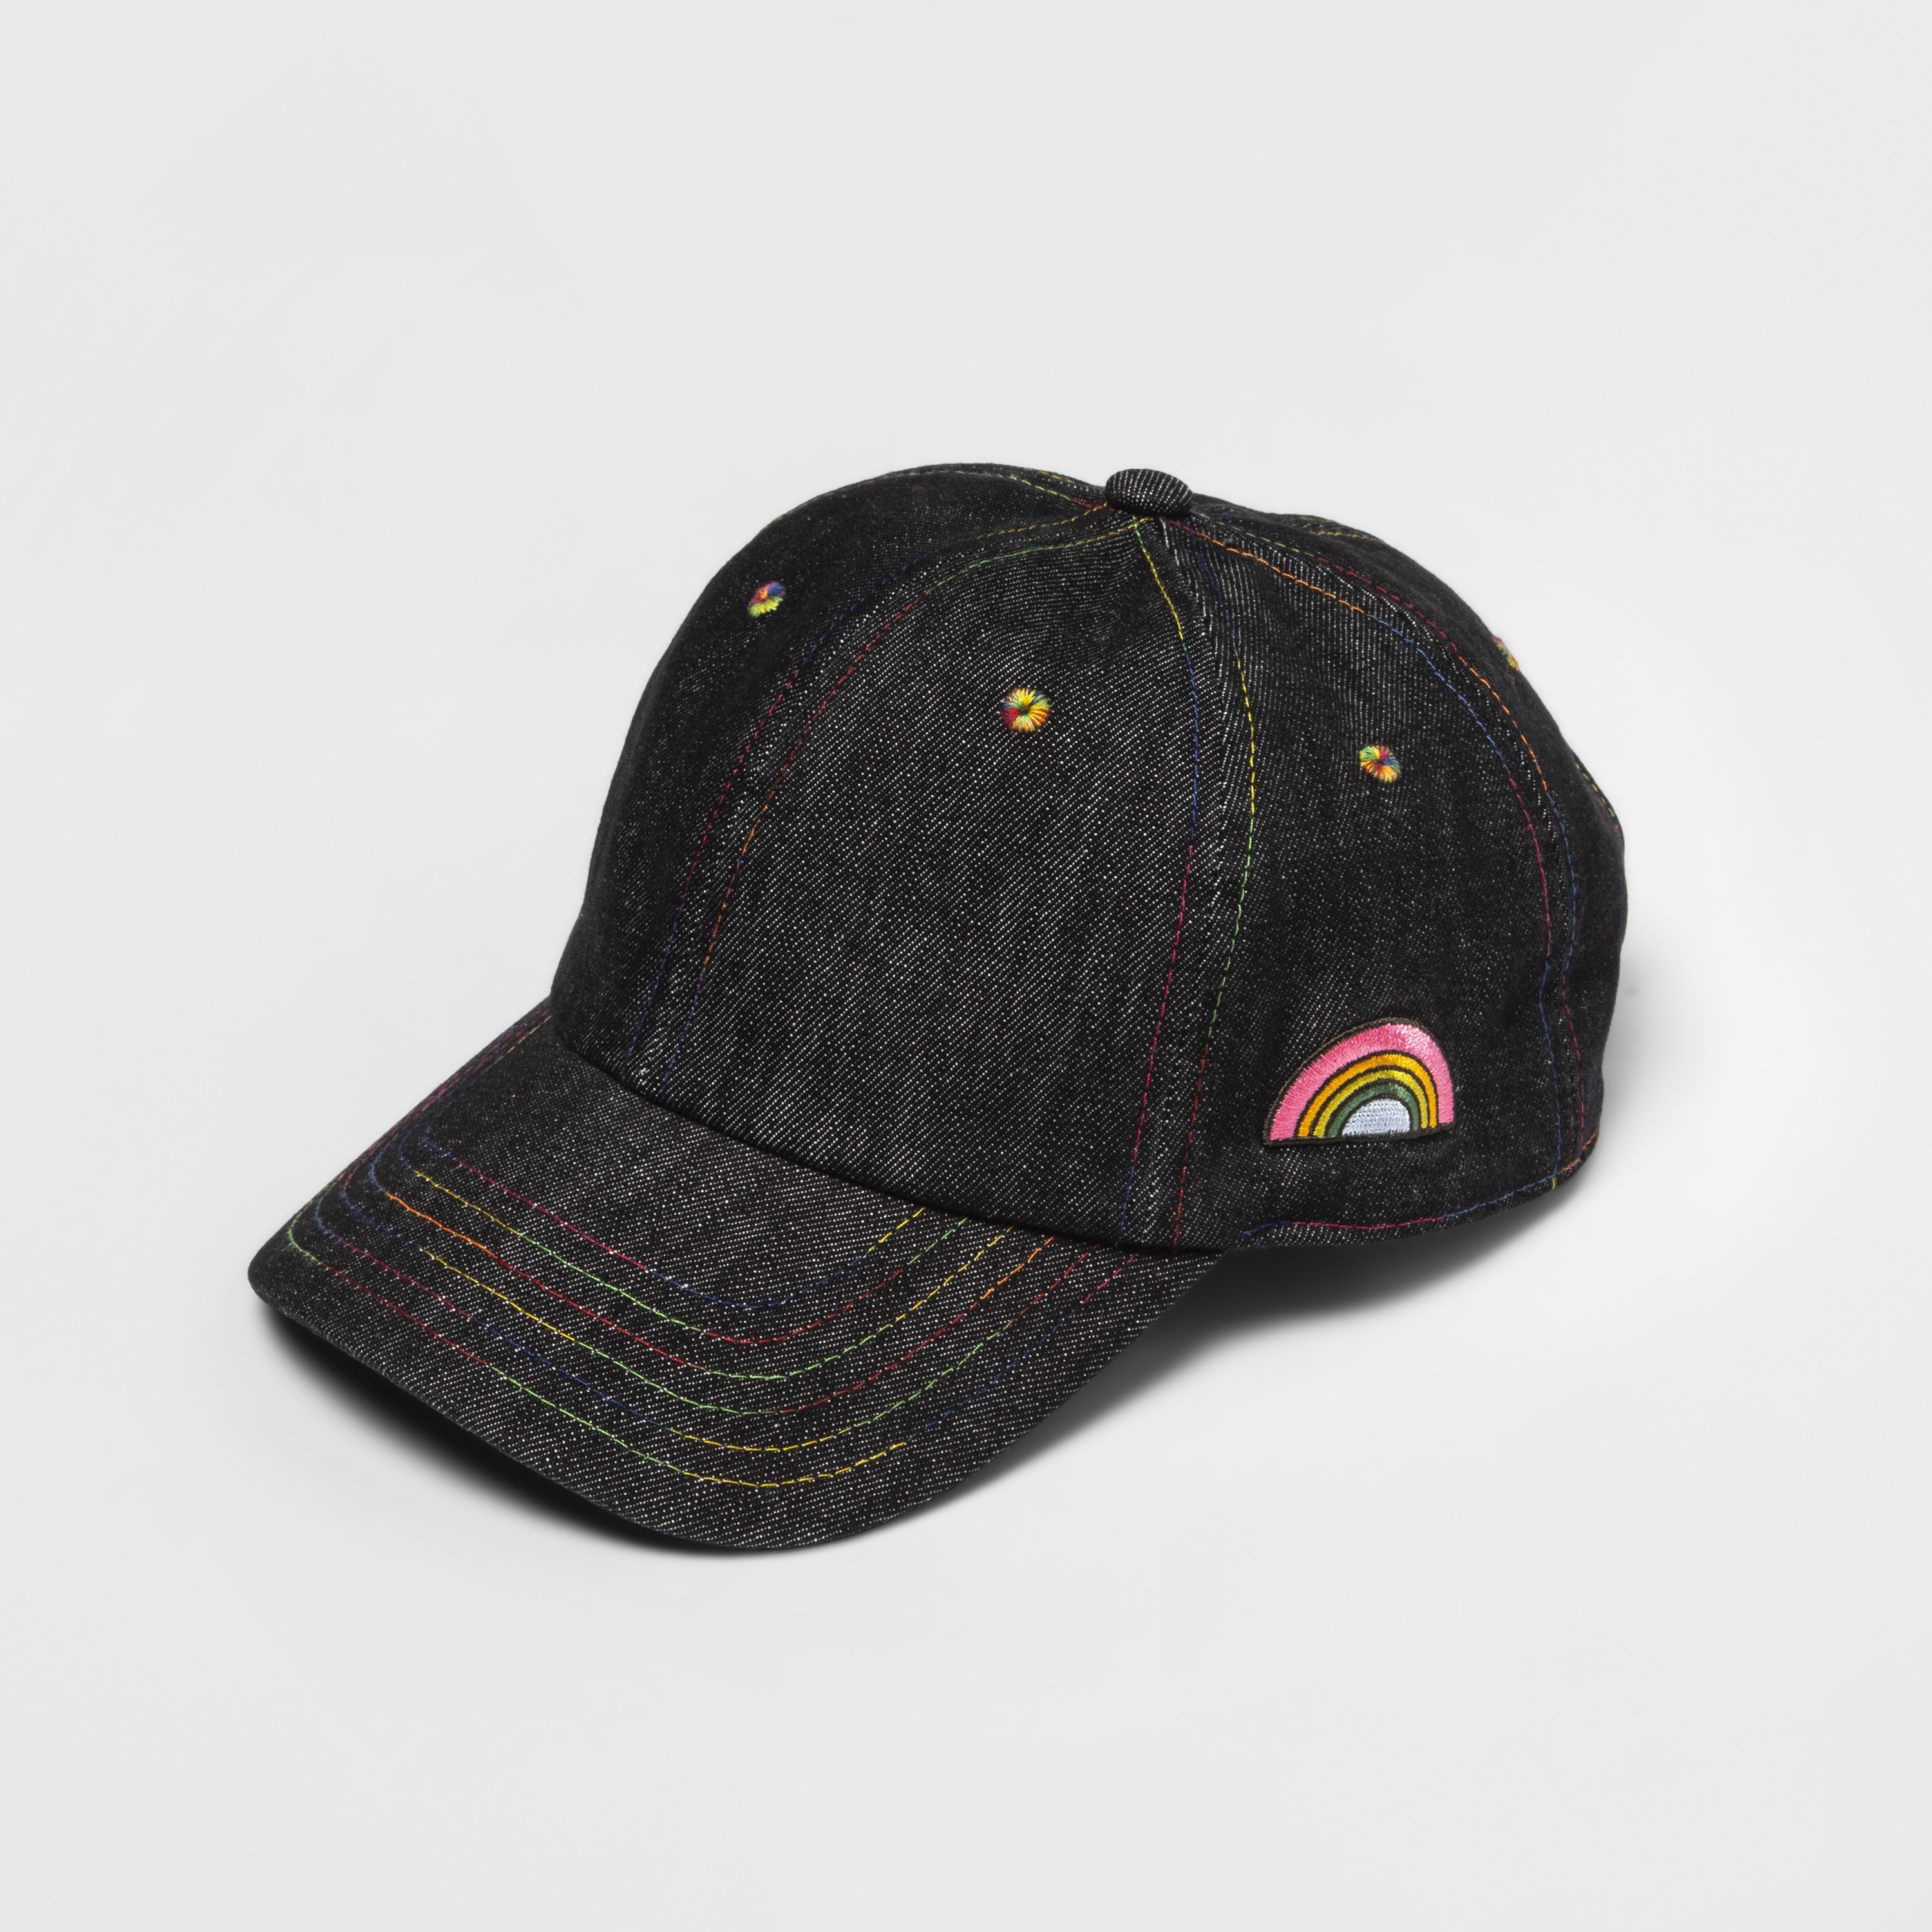 Denim baseball cap with embroidered rainbow on the side